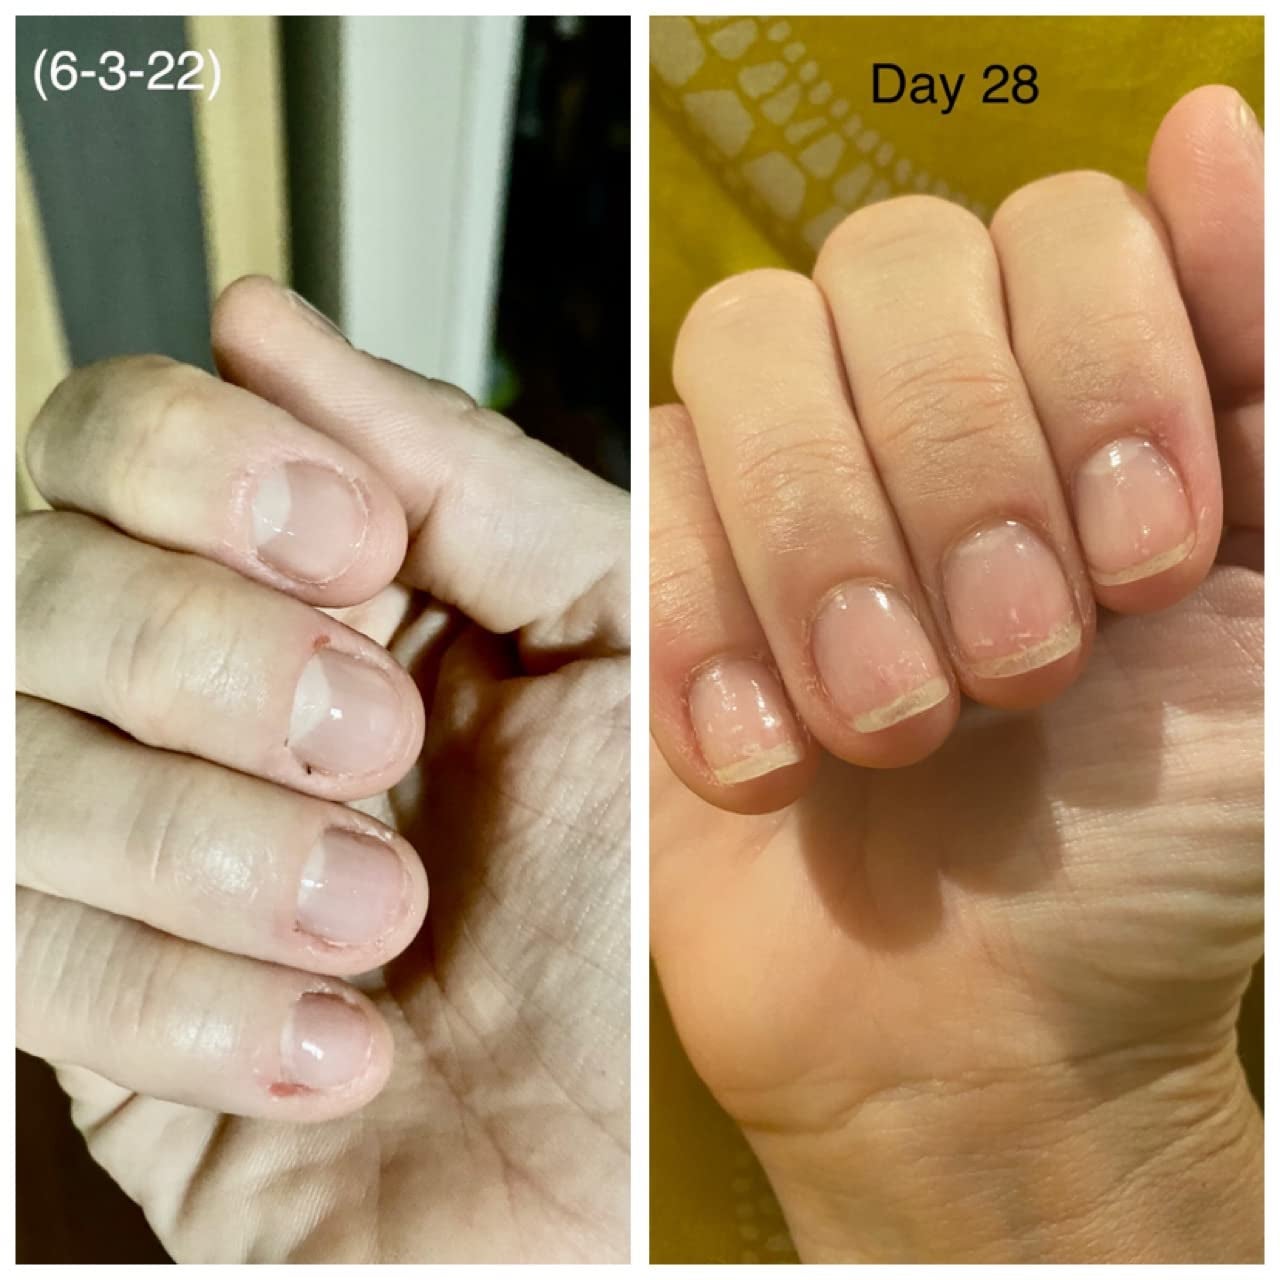 Reviewer pic of their nails before and after they stopped chewing on them